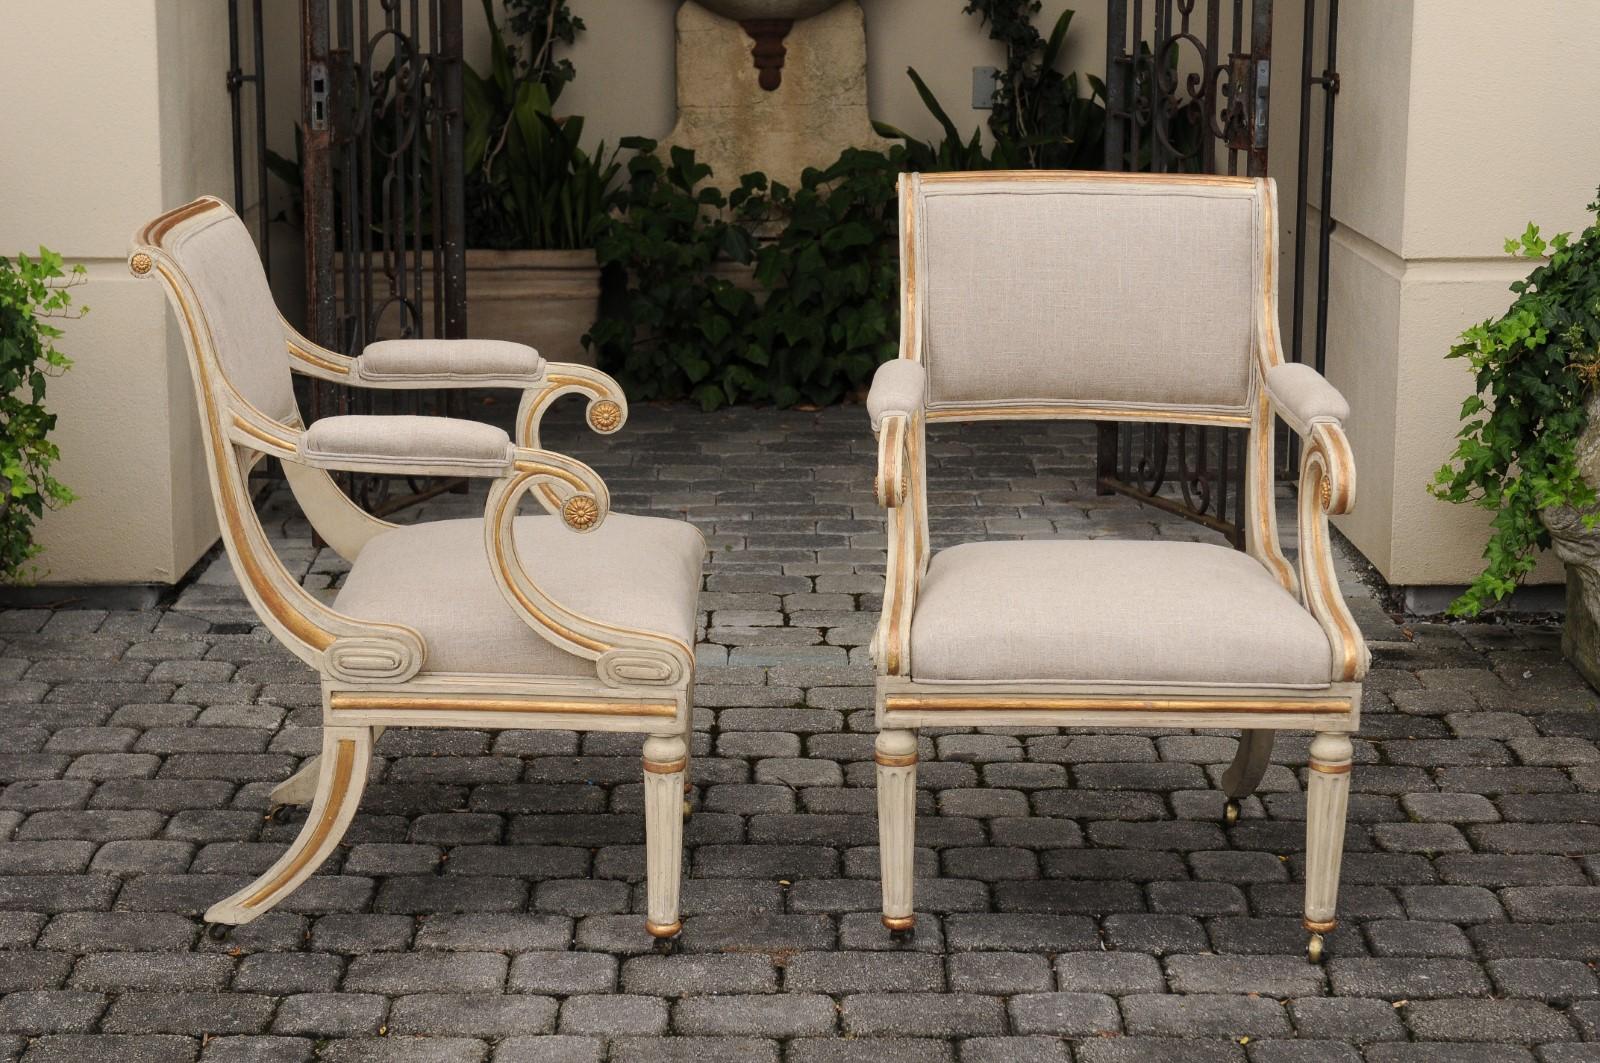 20th Century Pair of English 1900s Regency Style Painted and Parcel-Gilt Armchairs on Casters